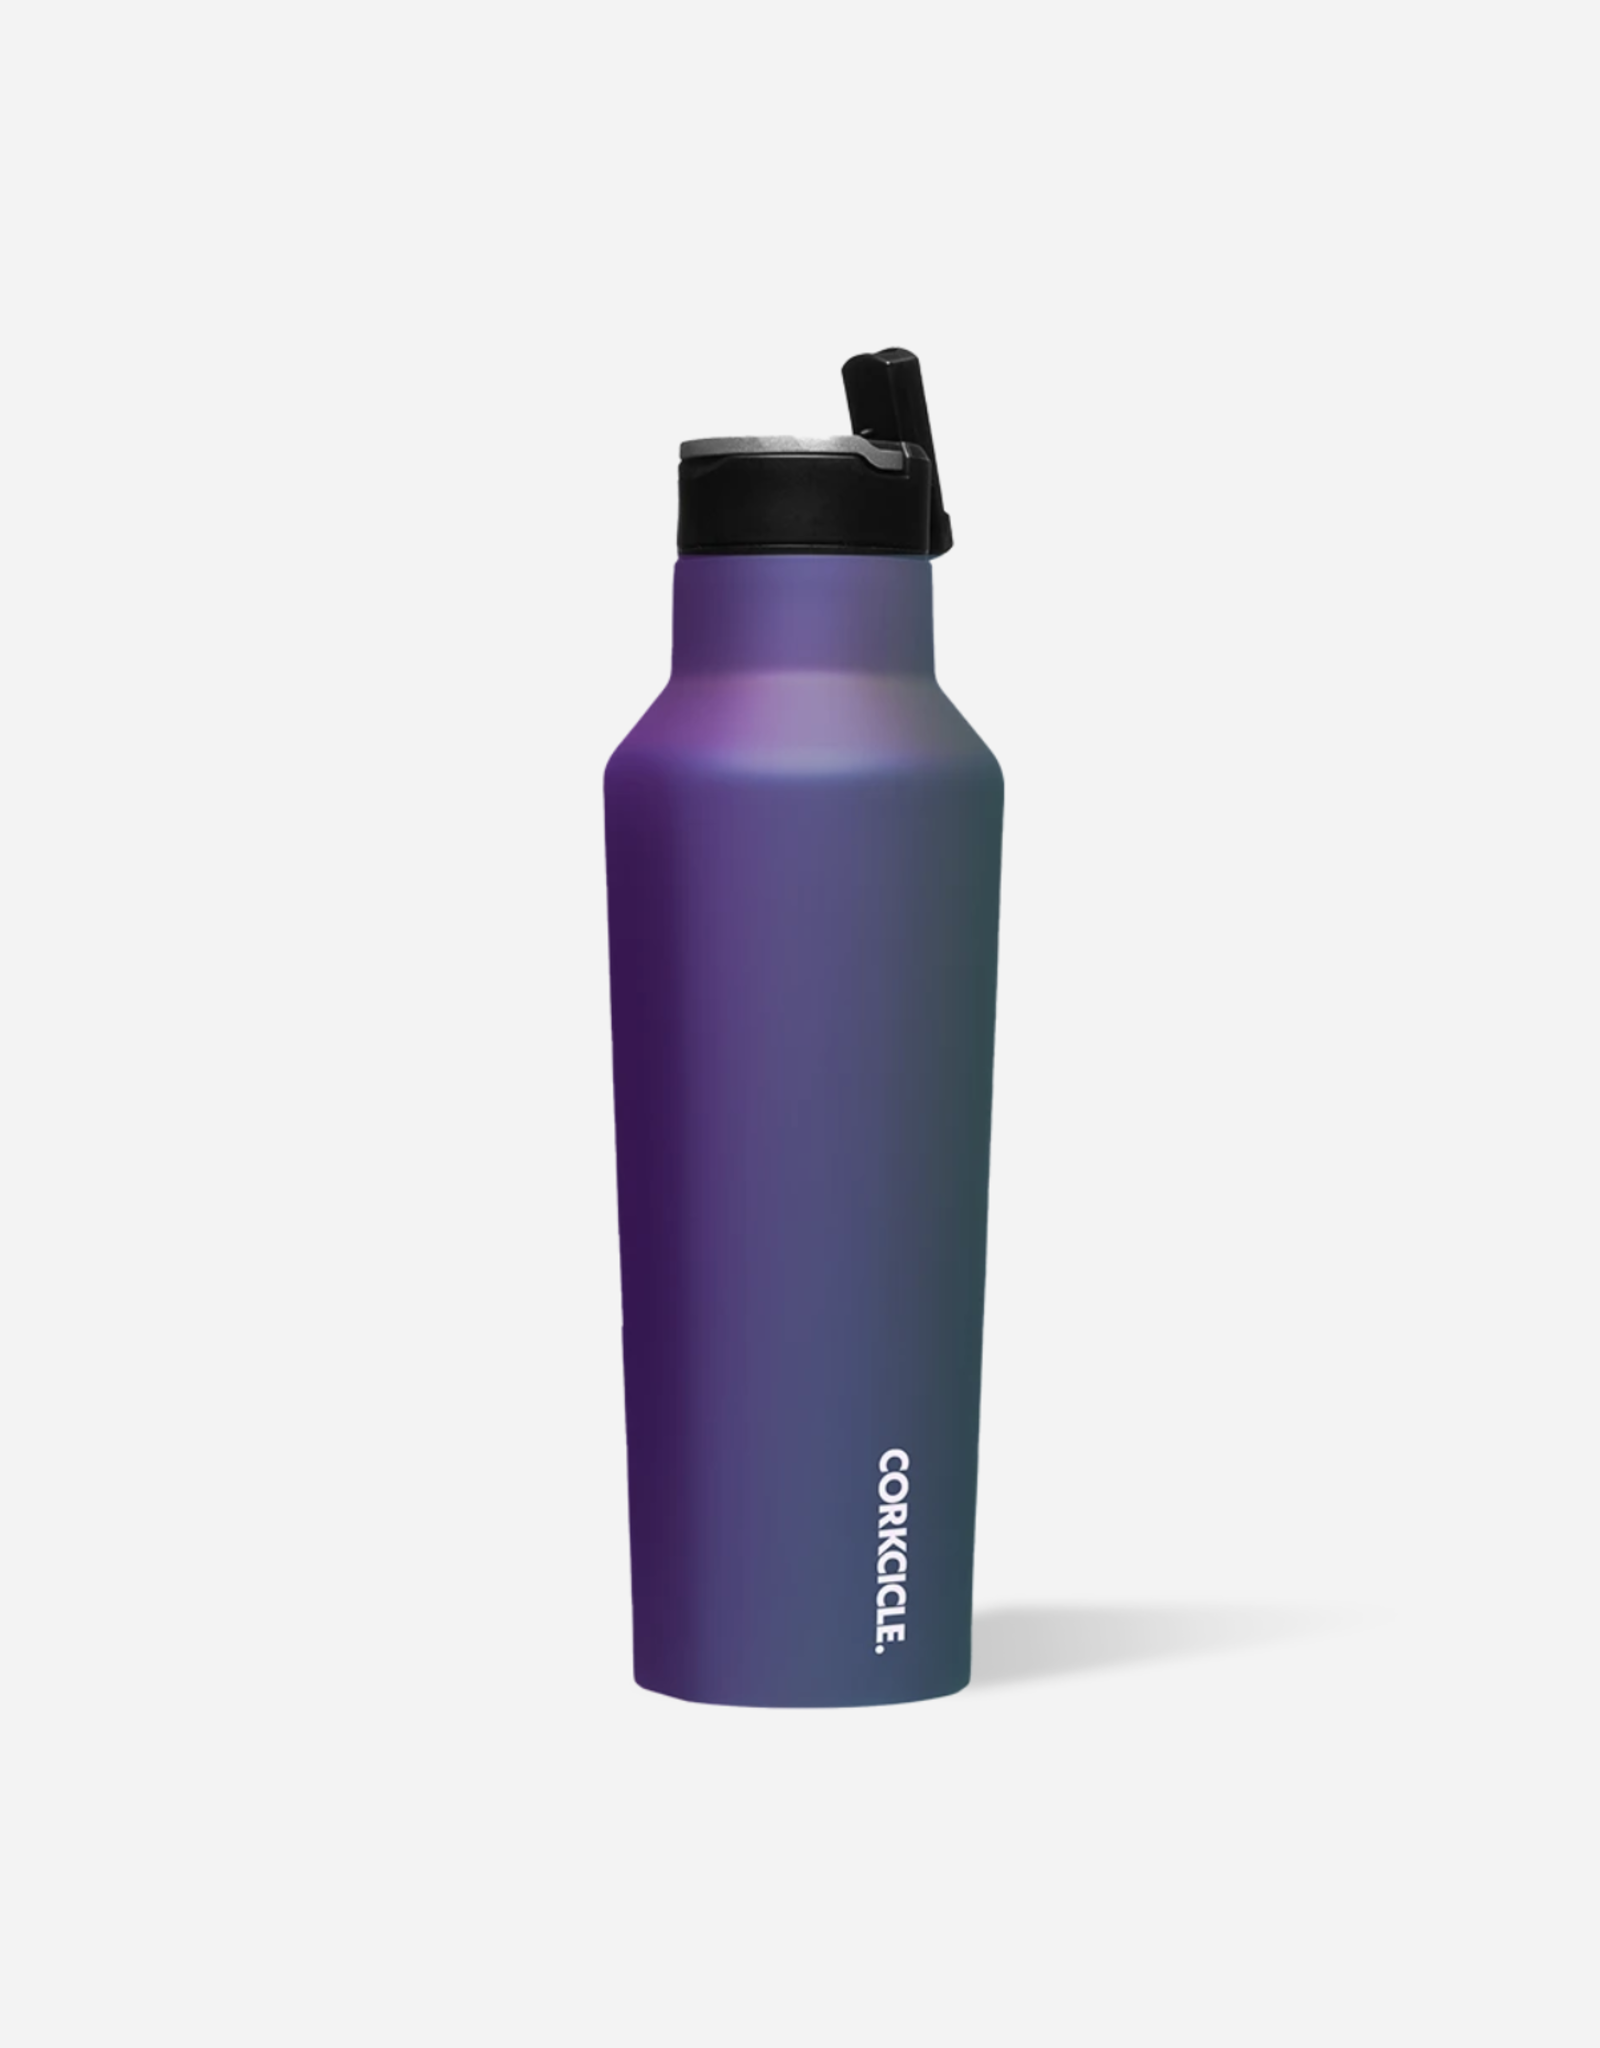 Corkcicle Corkcicle Dragonfly Sport Canteen 20 oz